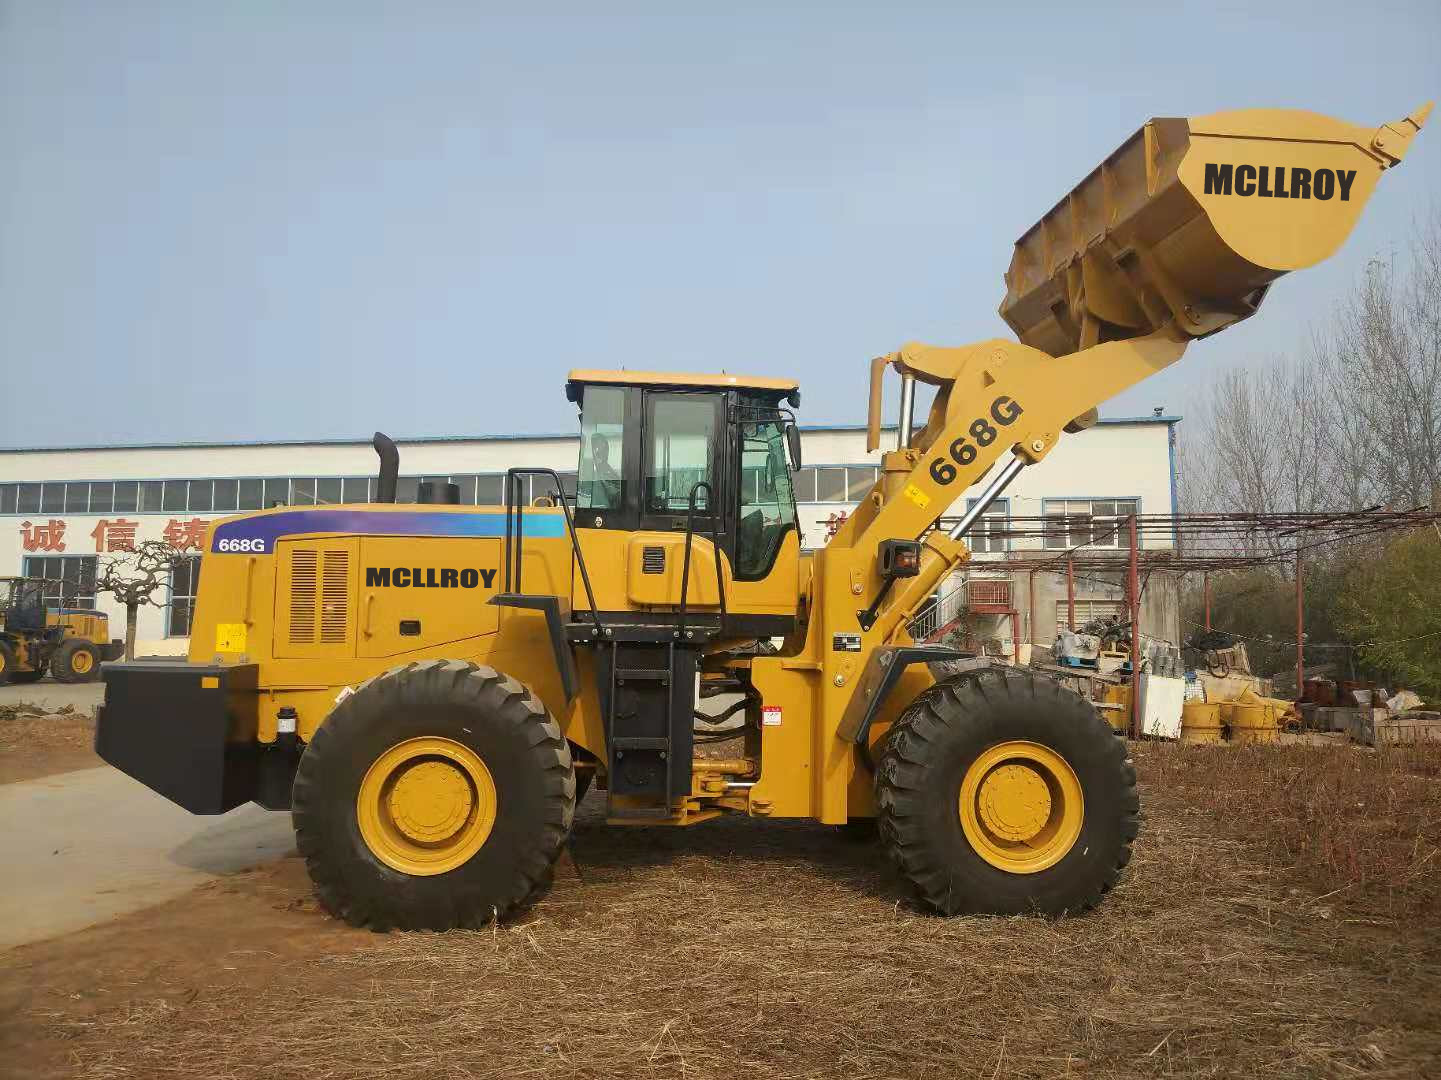  WD10G210E22 6T 668D 668G Heavy Duty Wheel Loader Manufactures